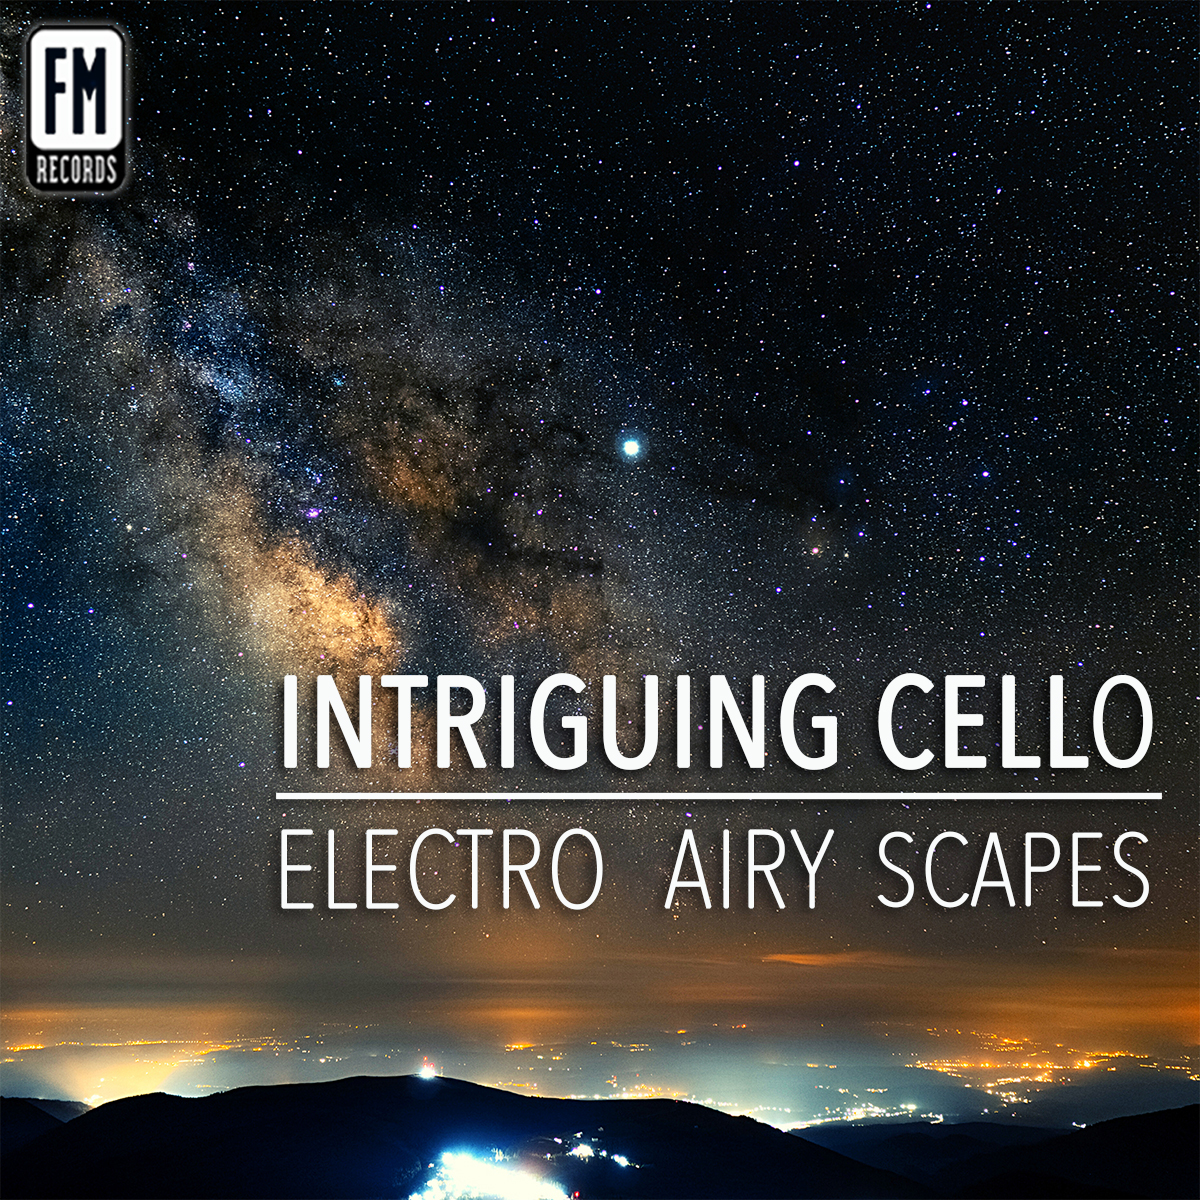 Intriguing Cello - Electro Airy Scapes